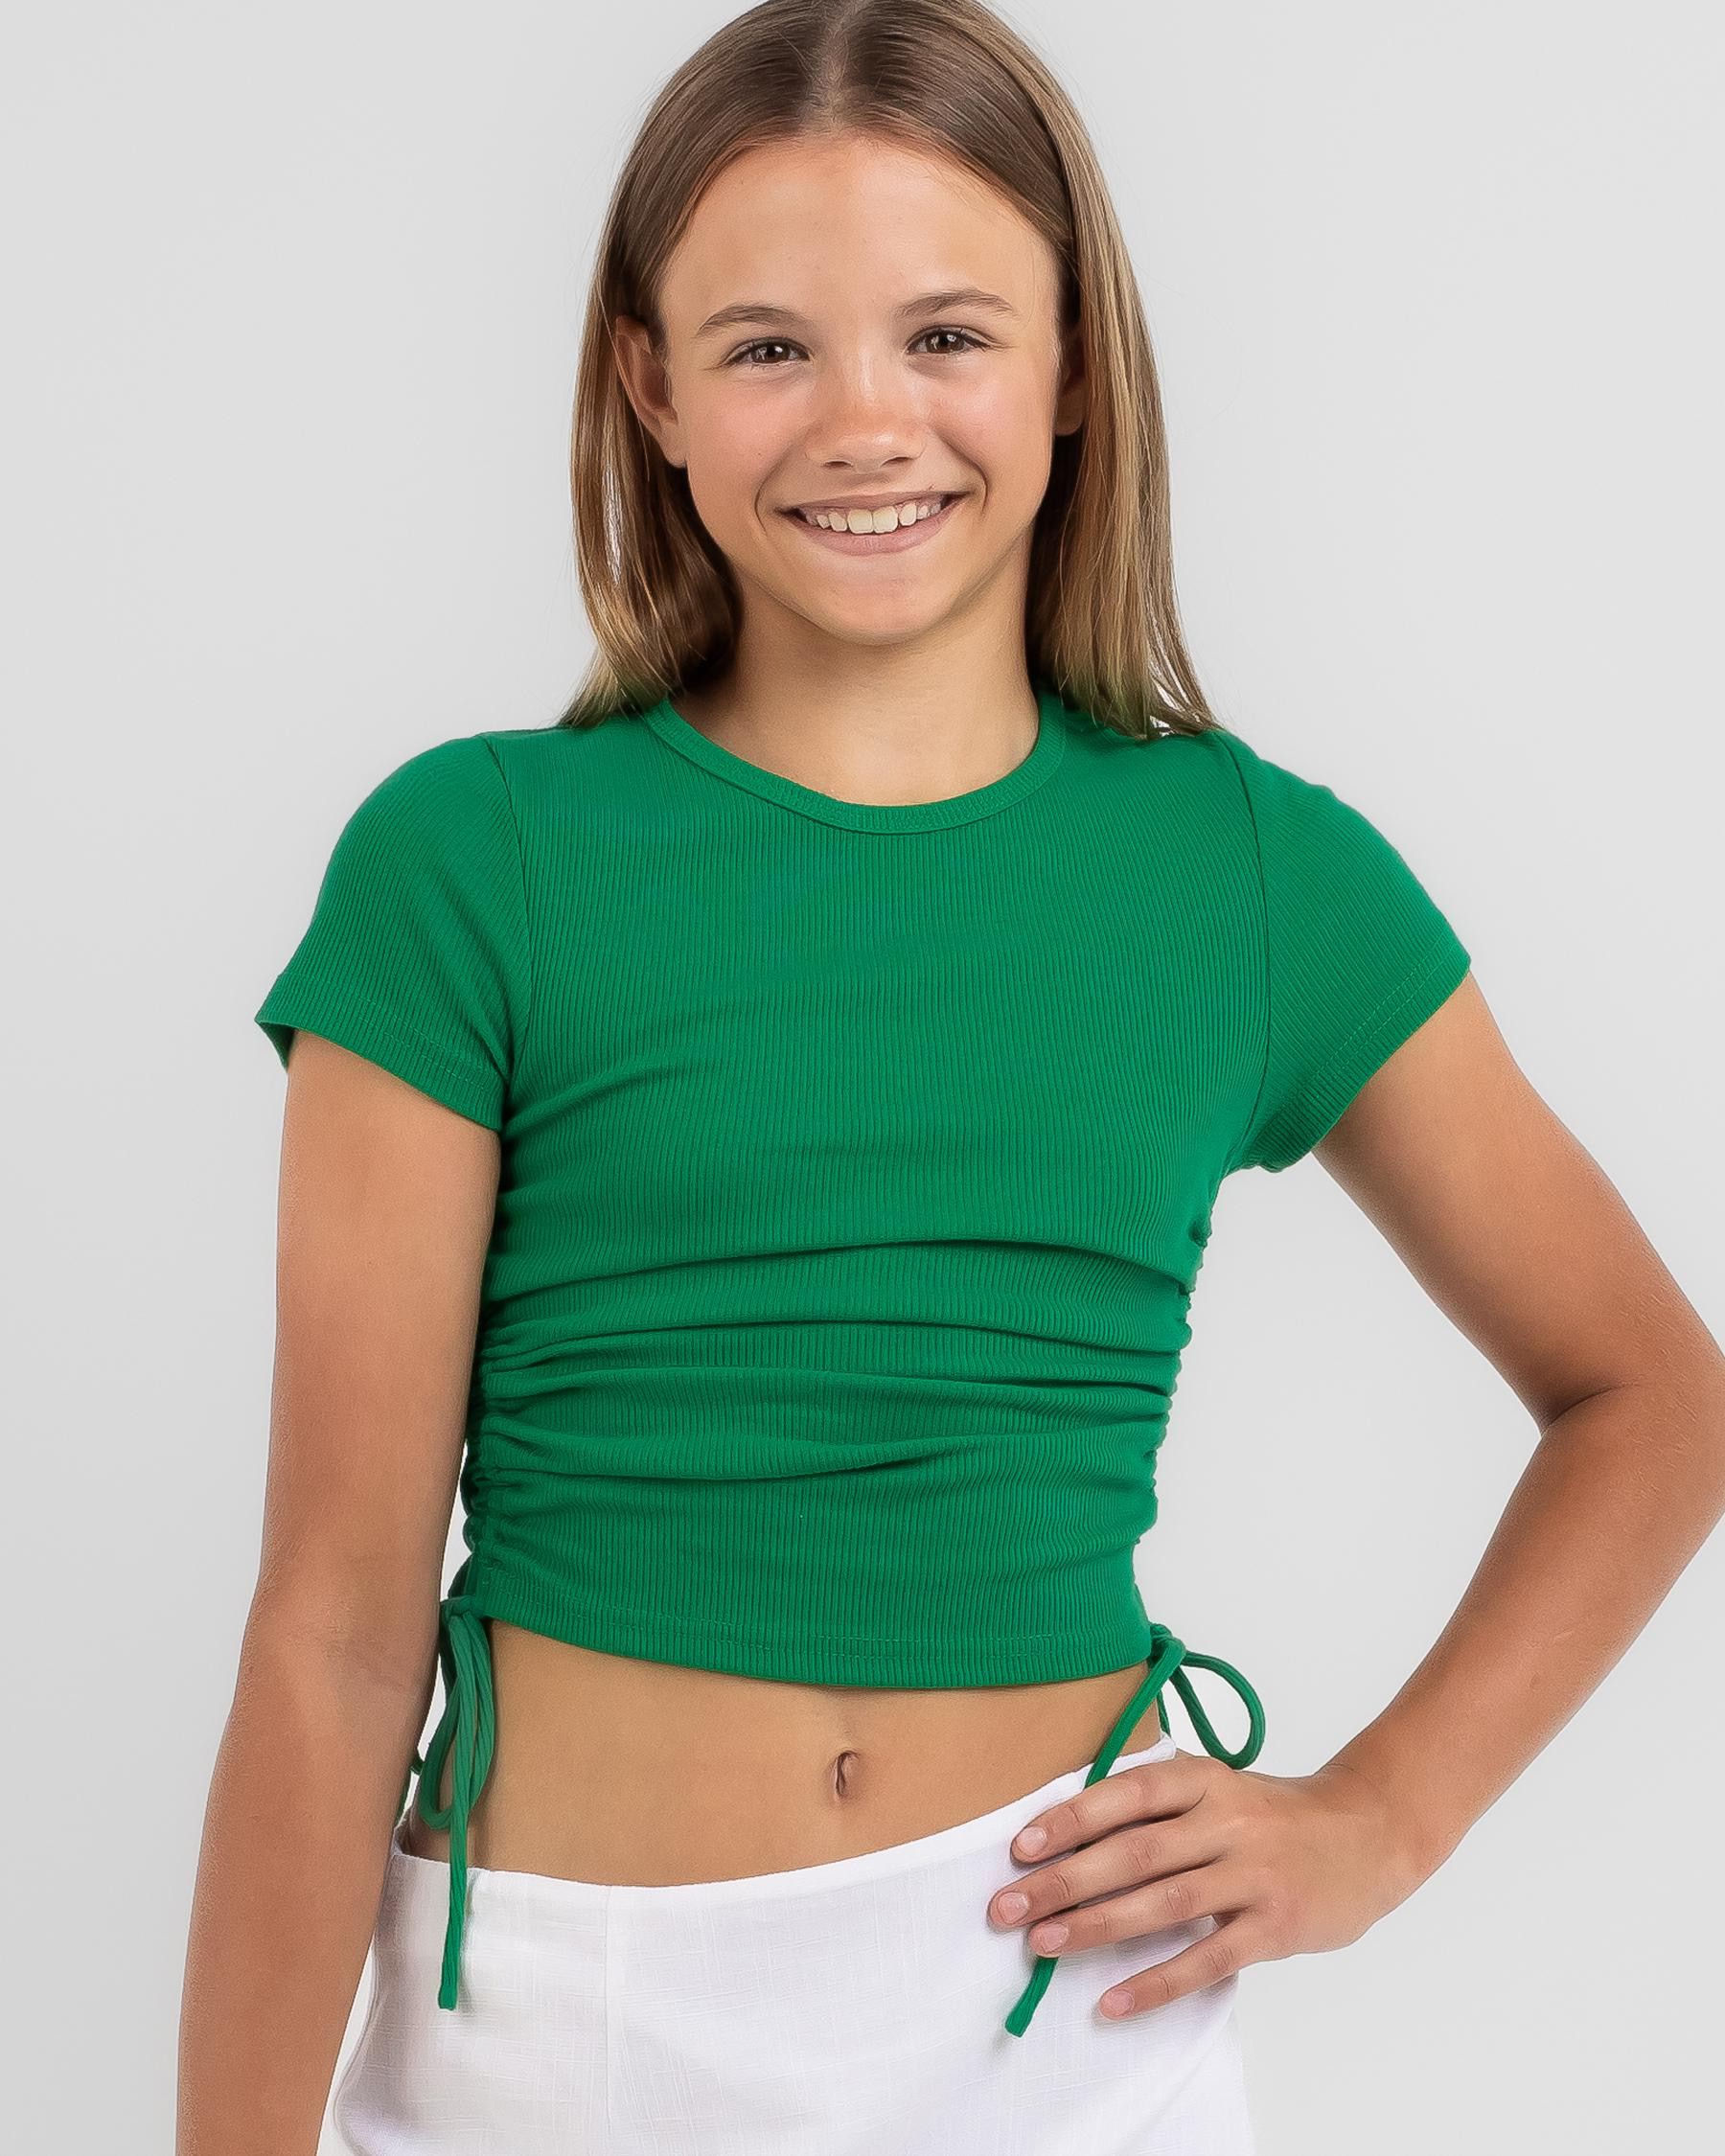 Ava And Ever Girls' Kenny Top In Bright Green - Fast Shipping & Easy ...